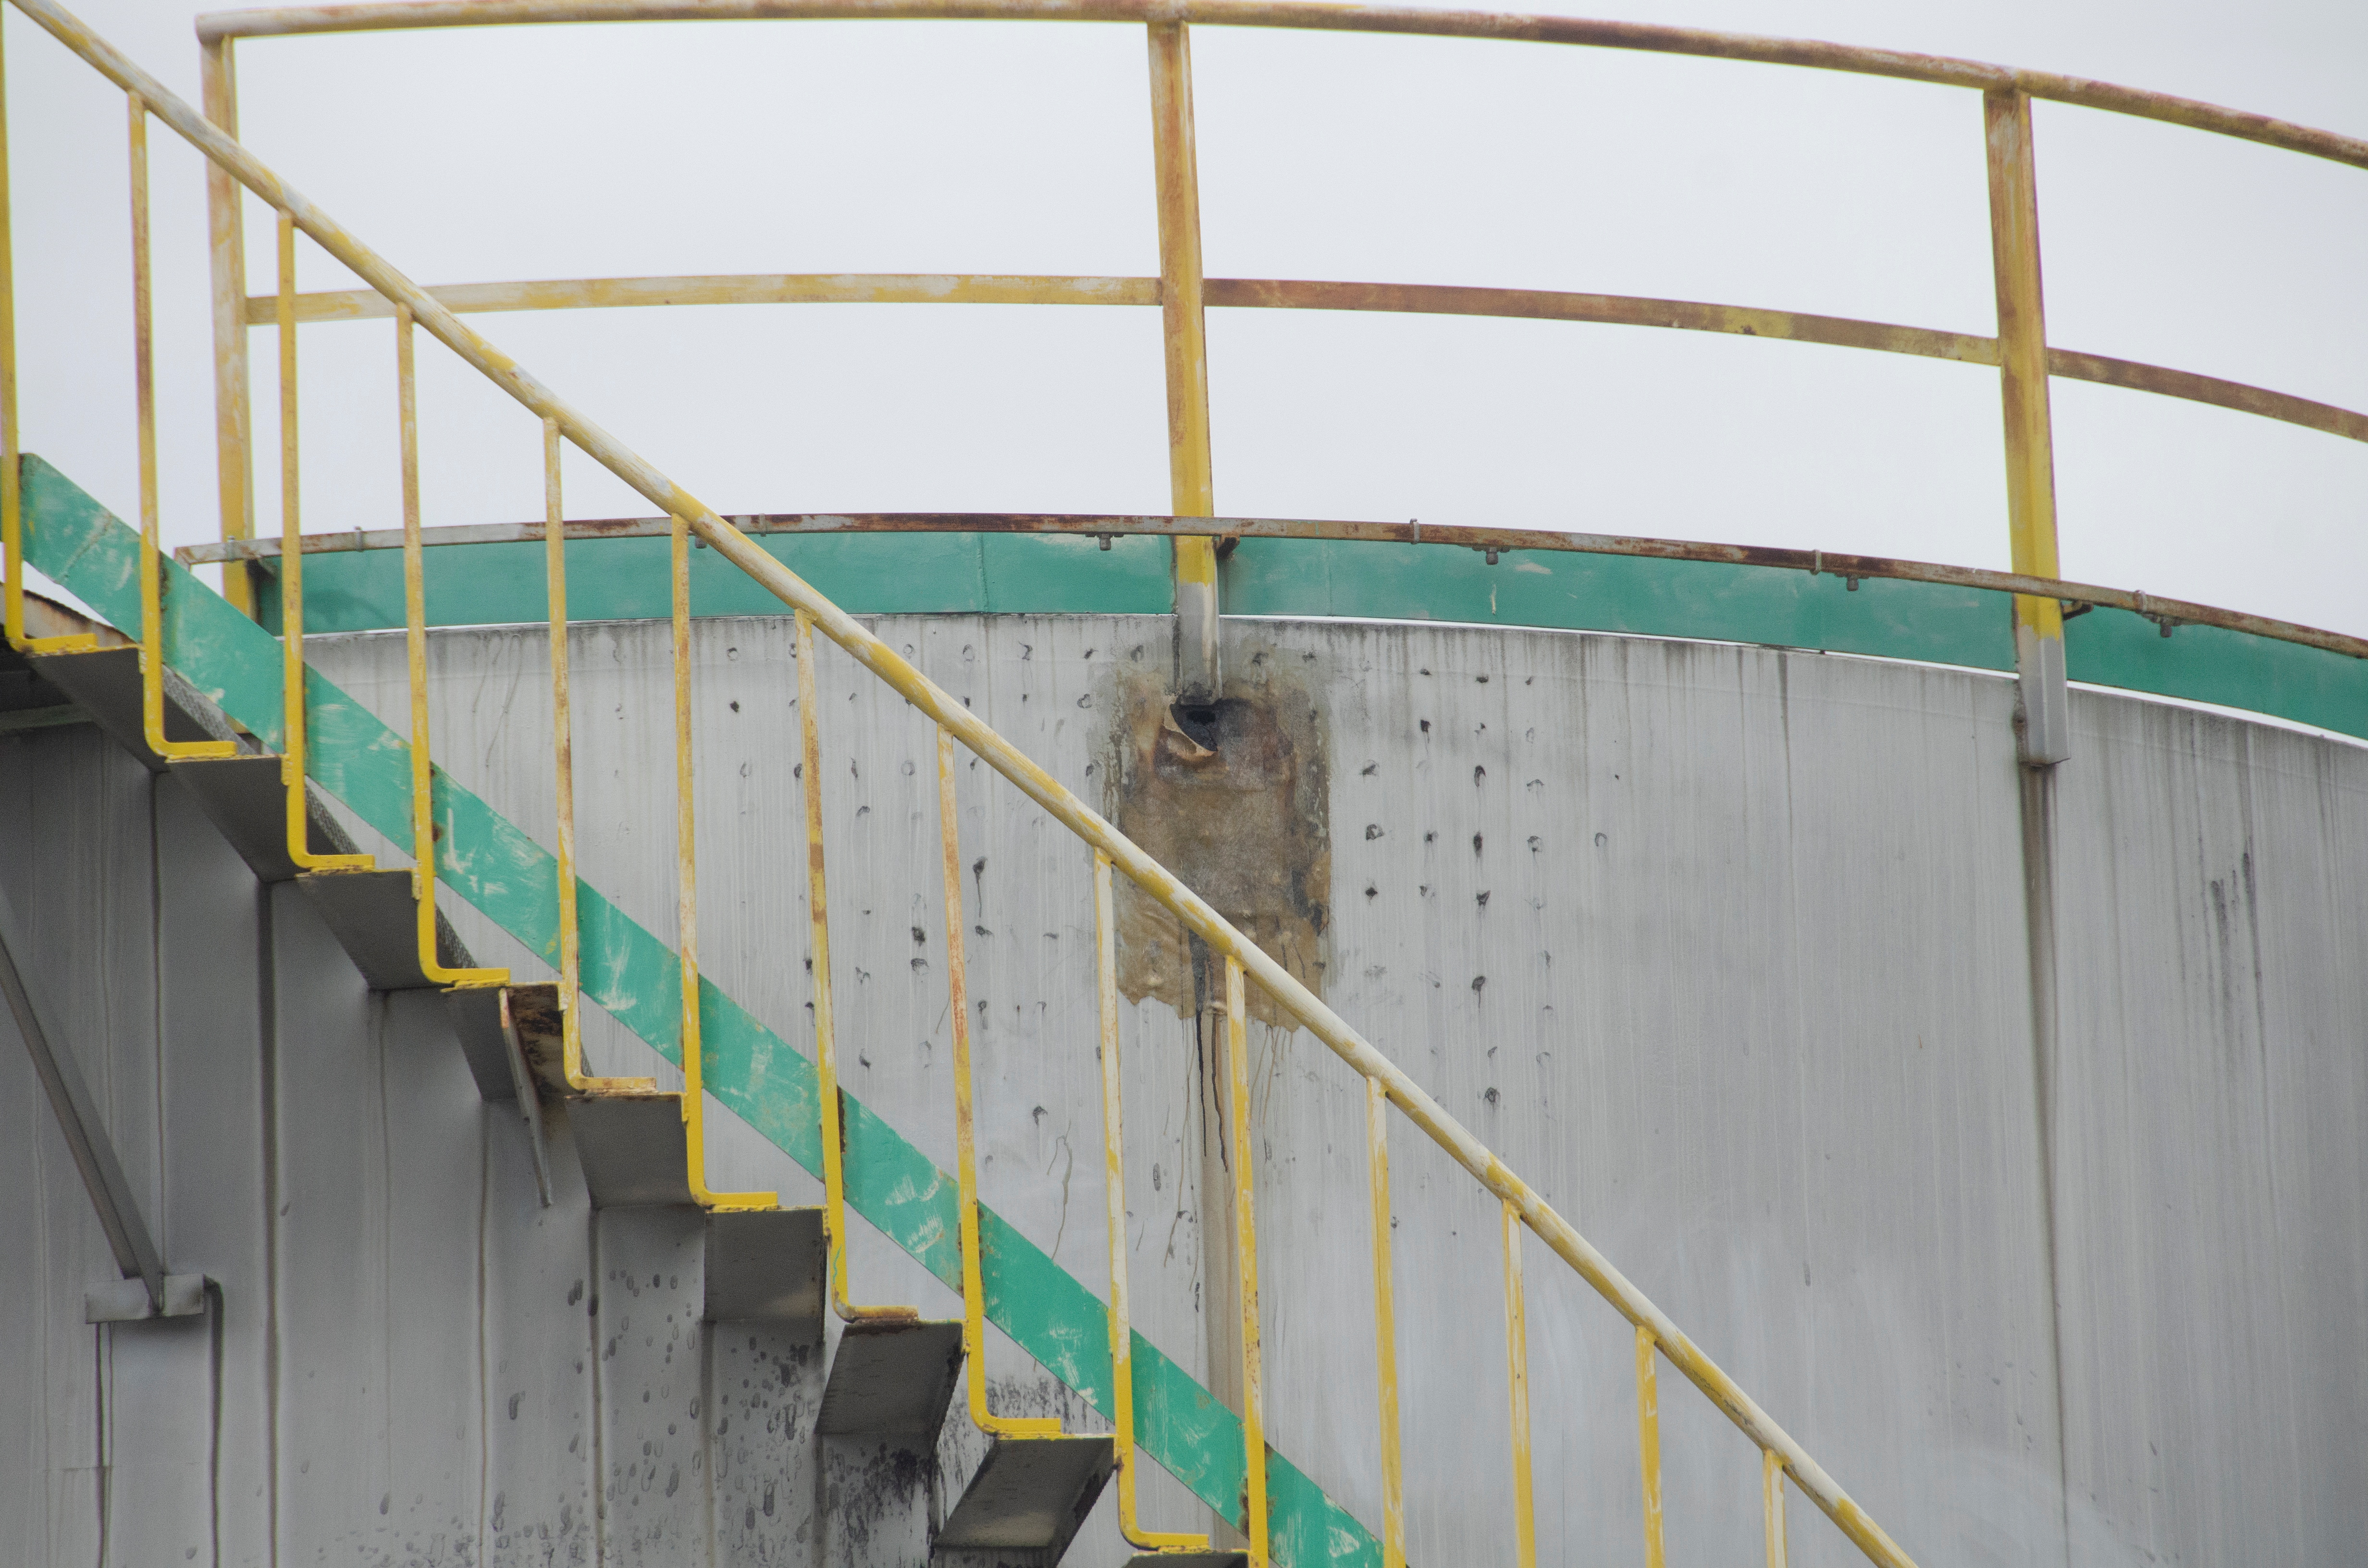 A handout photograph provided to Reuters by CATF shows a small hole on the side of a storage tank at the Eni gas plant near Pineto